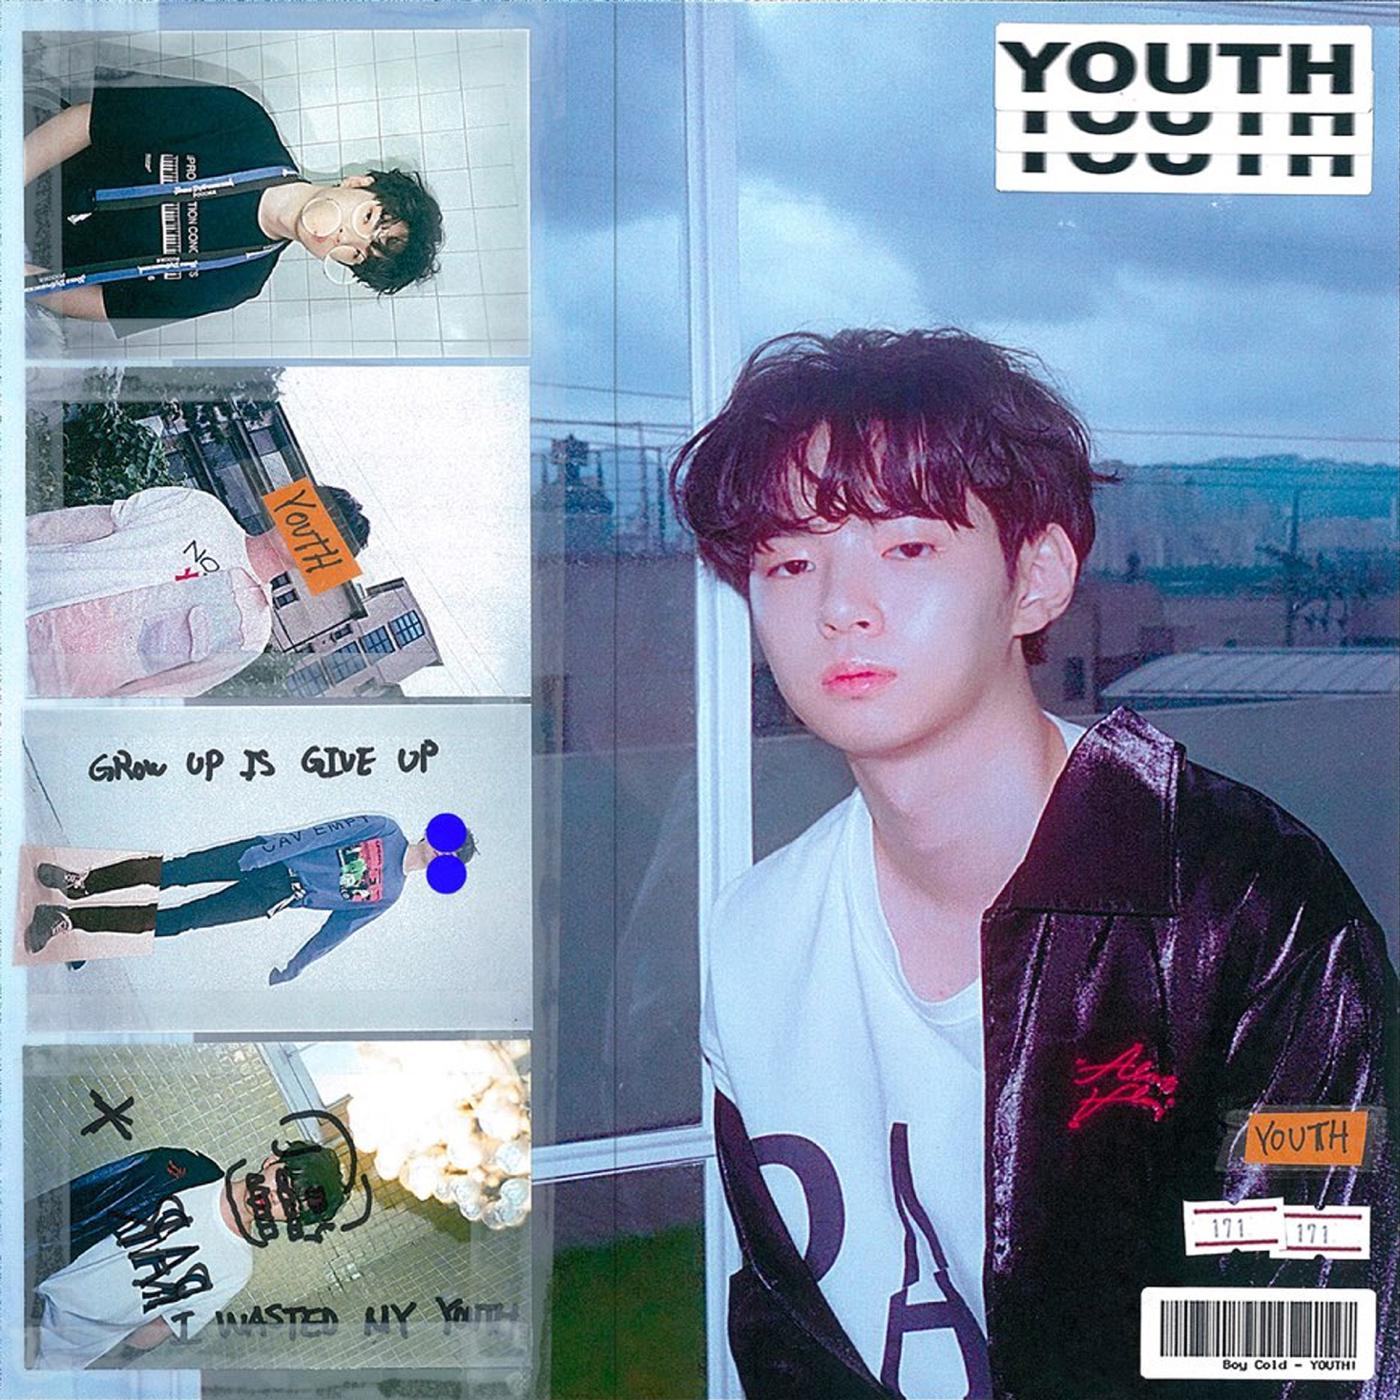 YOUTH!歌词 歌手BOYCOLD / HAON / Coogie / BewhY-专辑YOUTH!-单曲《YOUTH!》LRC歌词下载